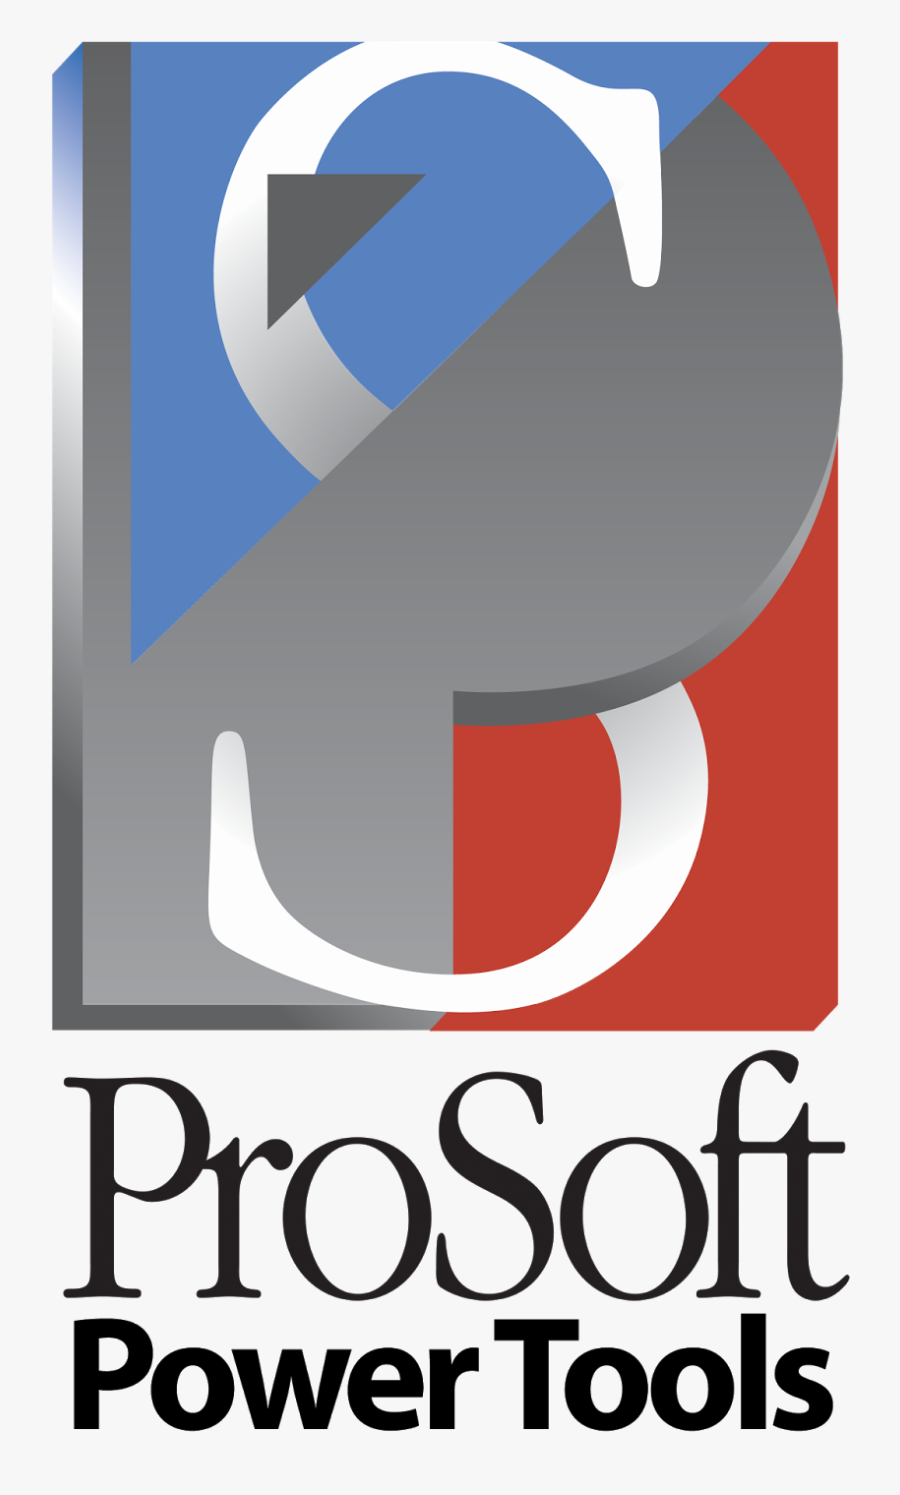 Below Is More Information About The Prosoft Power Tools - Graphic Design, Transparent Clipart